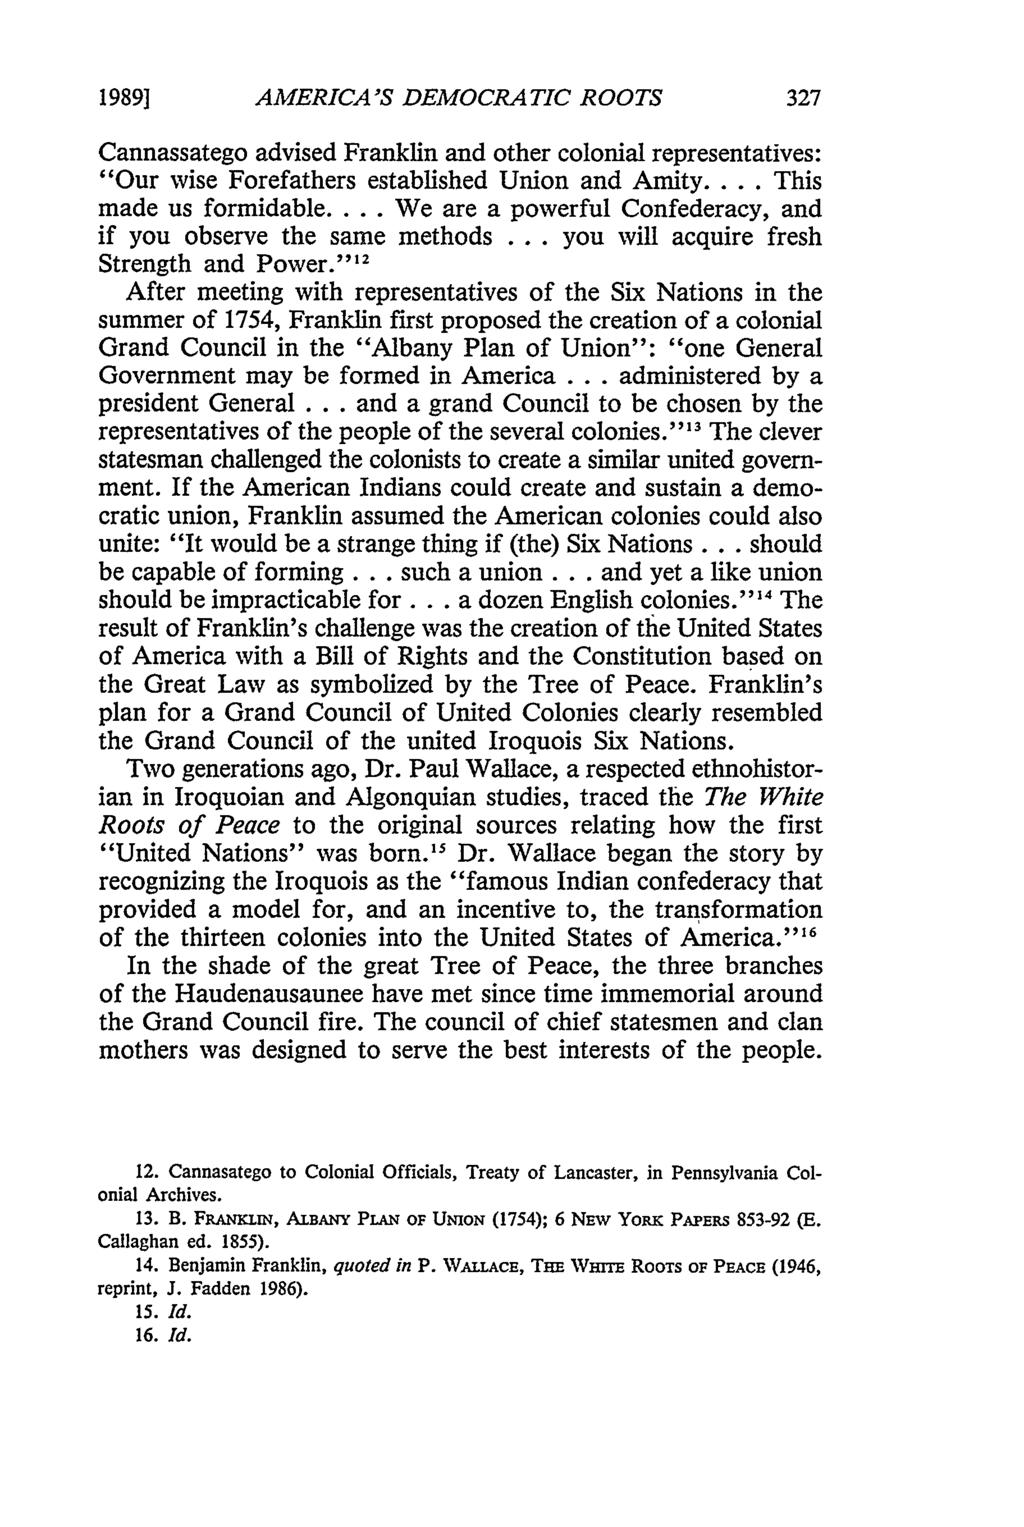 1989] AMERICA'S DEMOCRATIC ROOTS Cannassatego advised Franklin and other colonial representatives: "Our wise Forefathers established Union and Amity... This made us formidable.